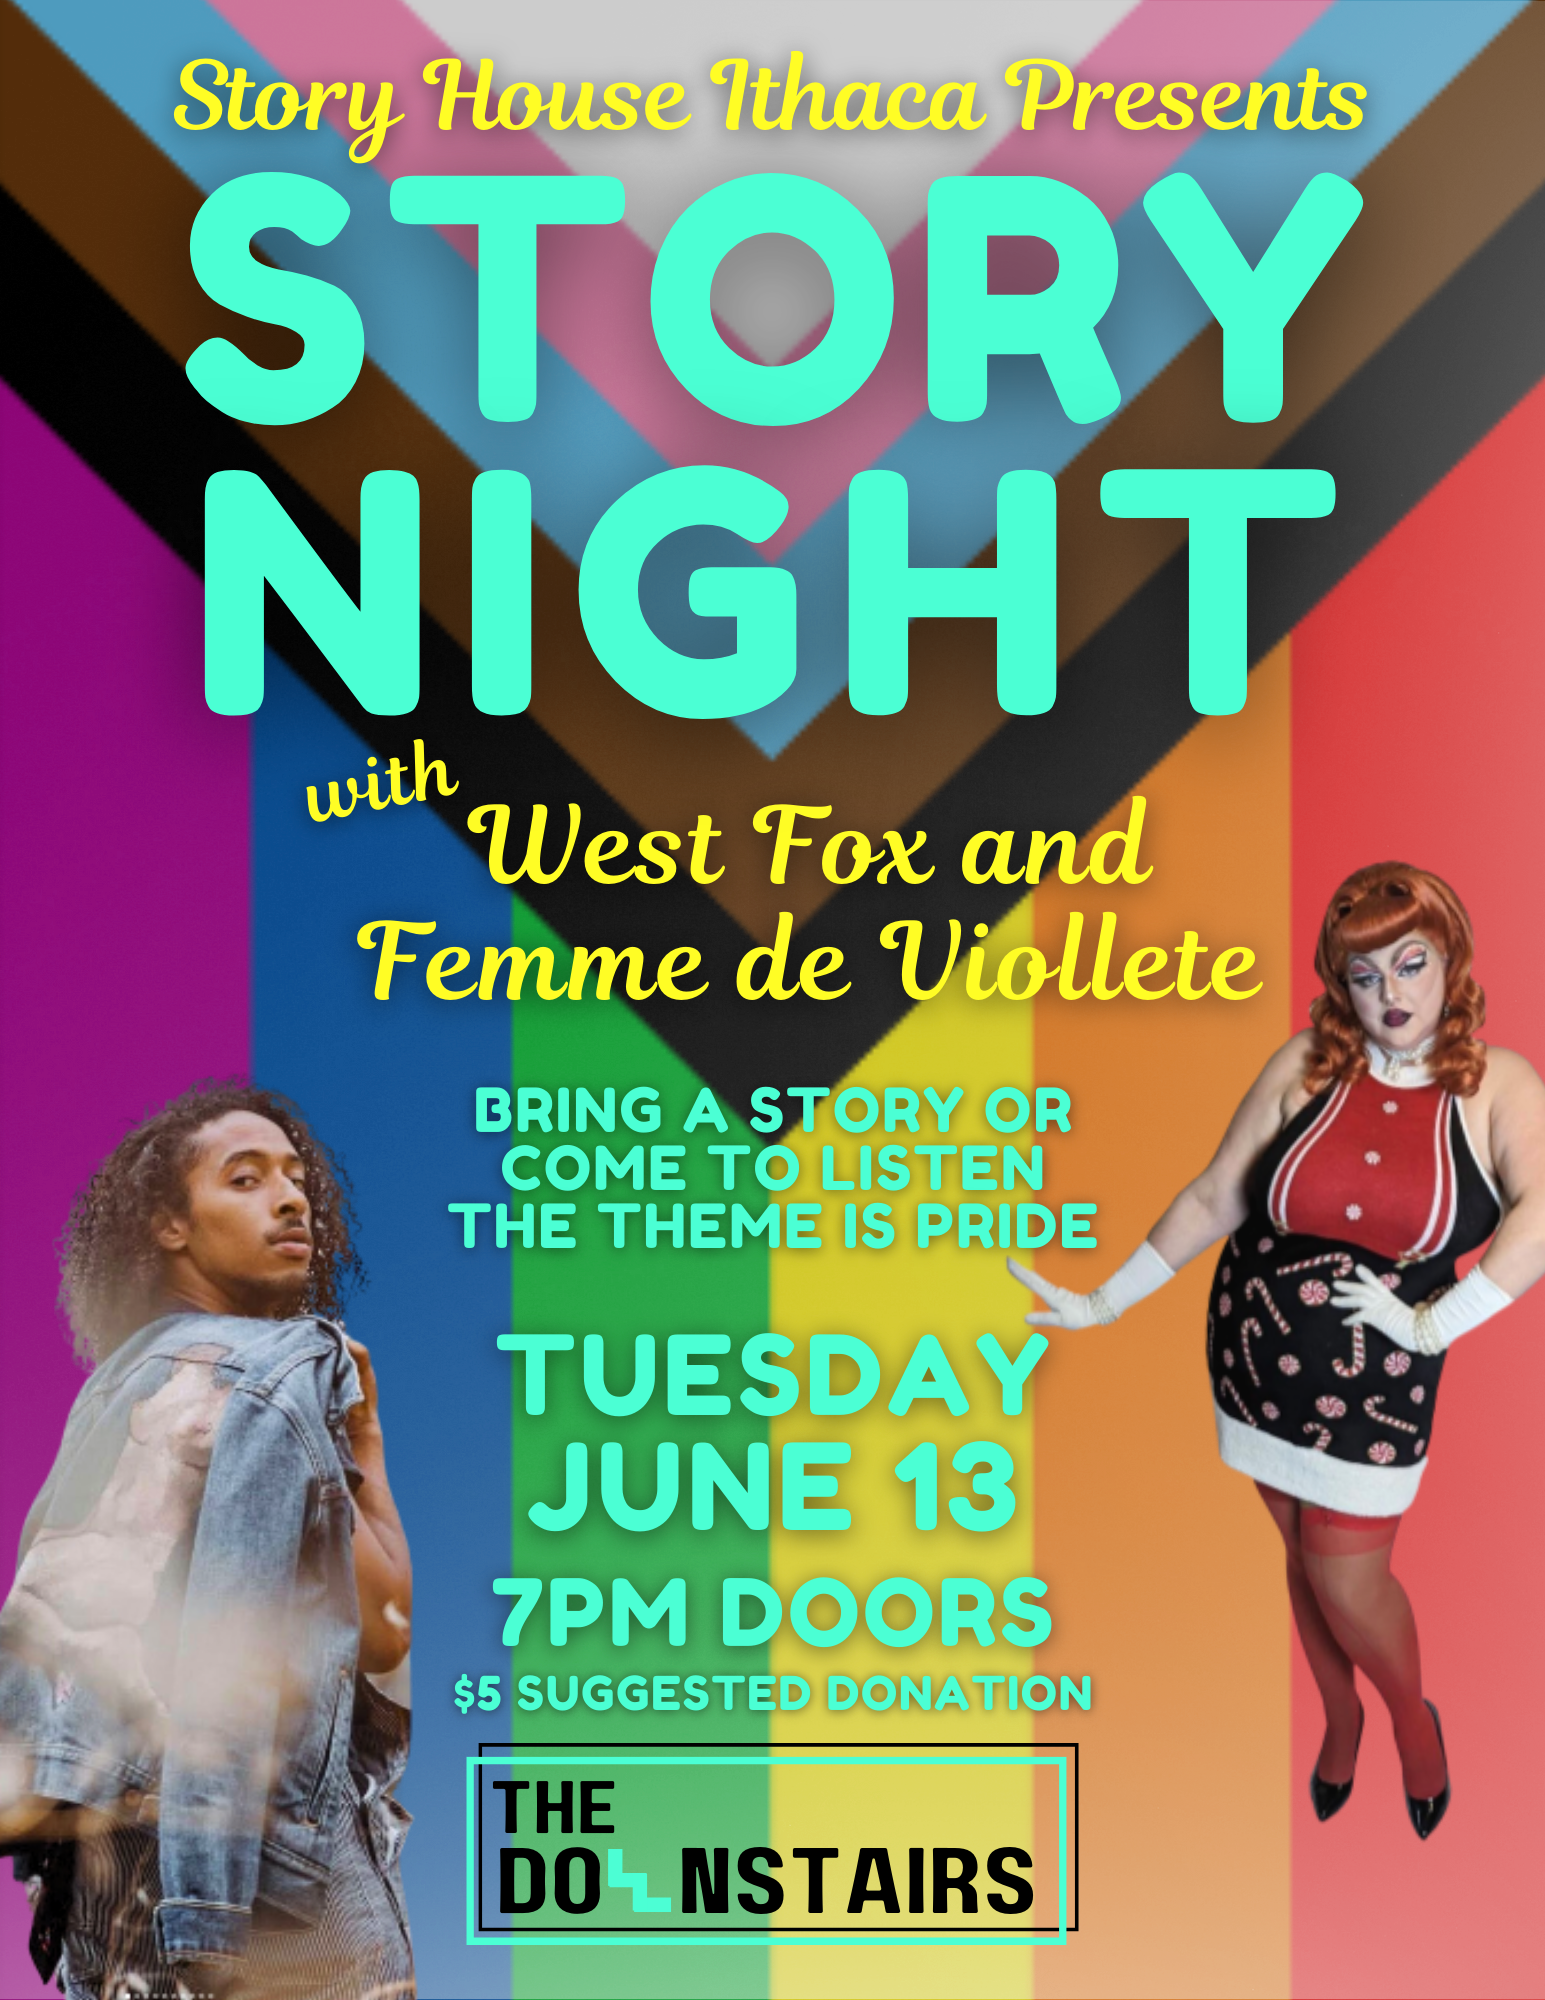 Story House Ithaca Presents Pride Story Night with West Fox and Femme de Violette